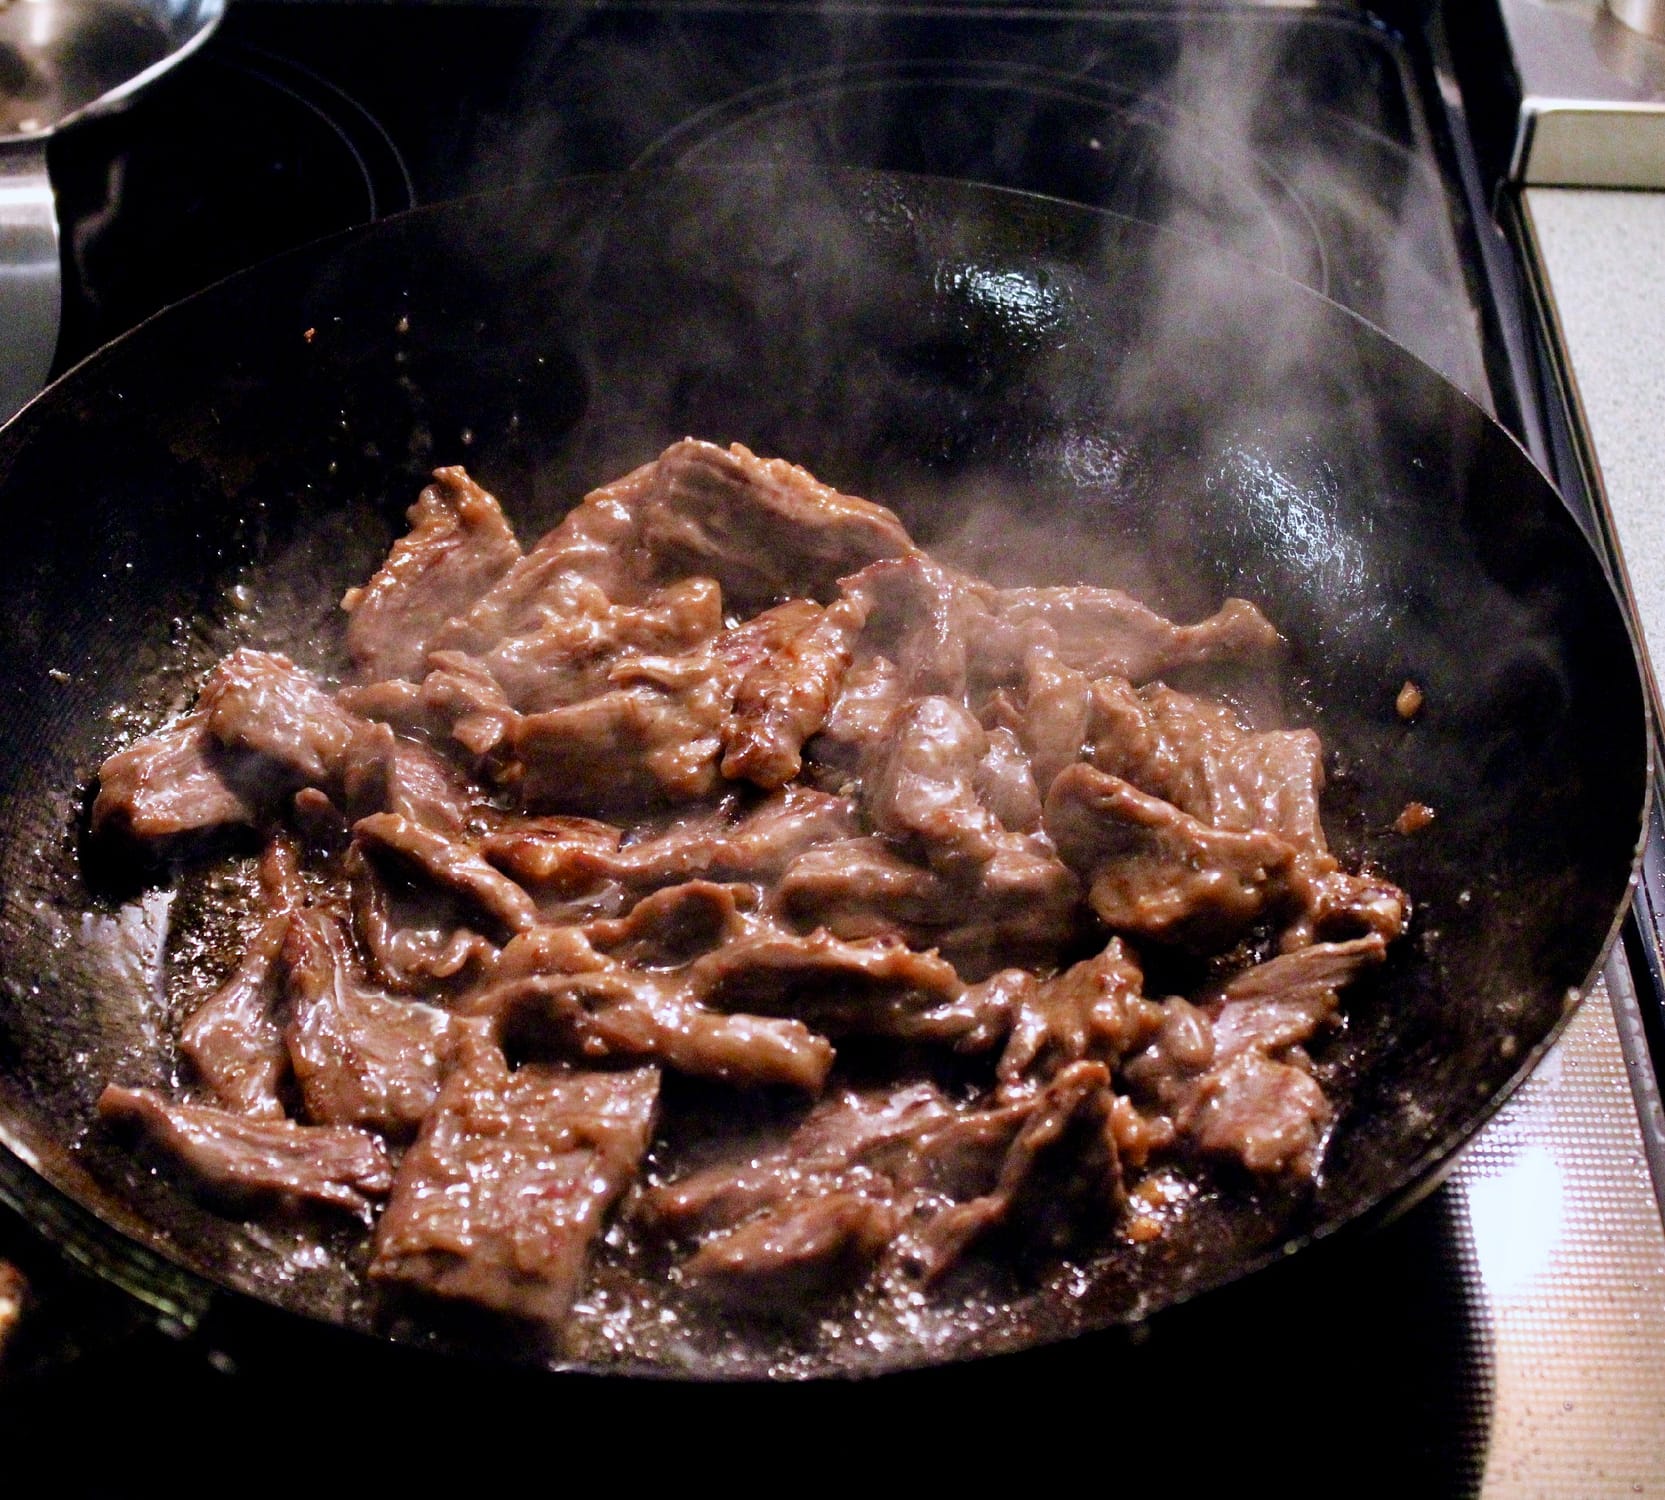 Finished, cooked beef in the wok.